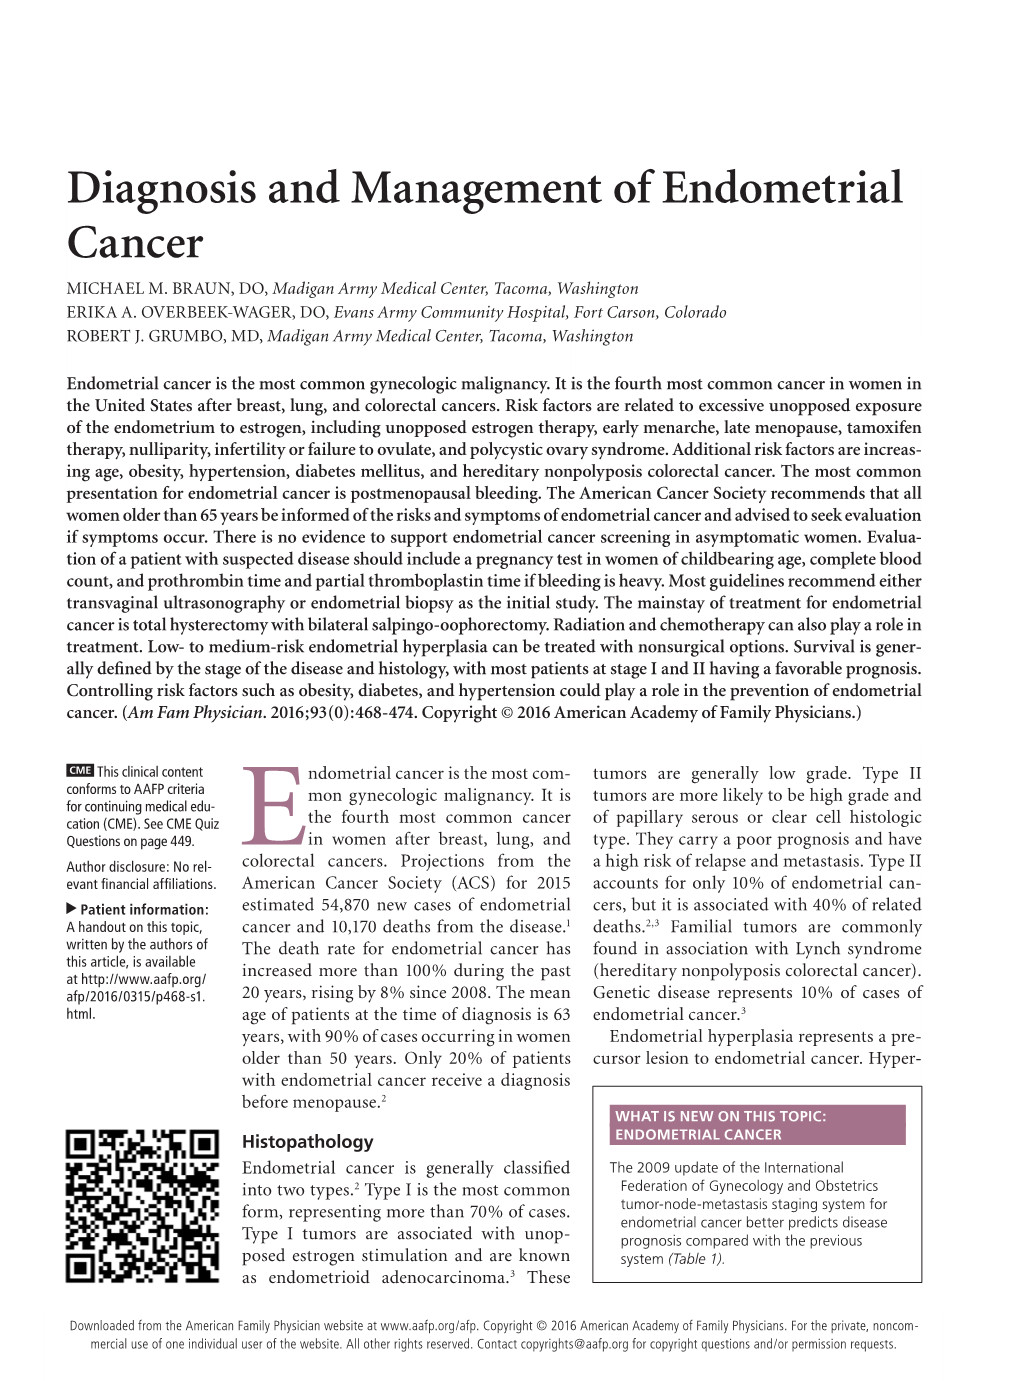 Diagnosis and Management of Endometrial Cancer MICHAEL M